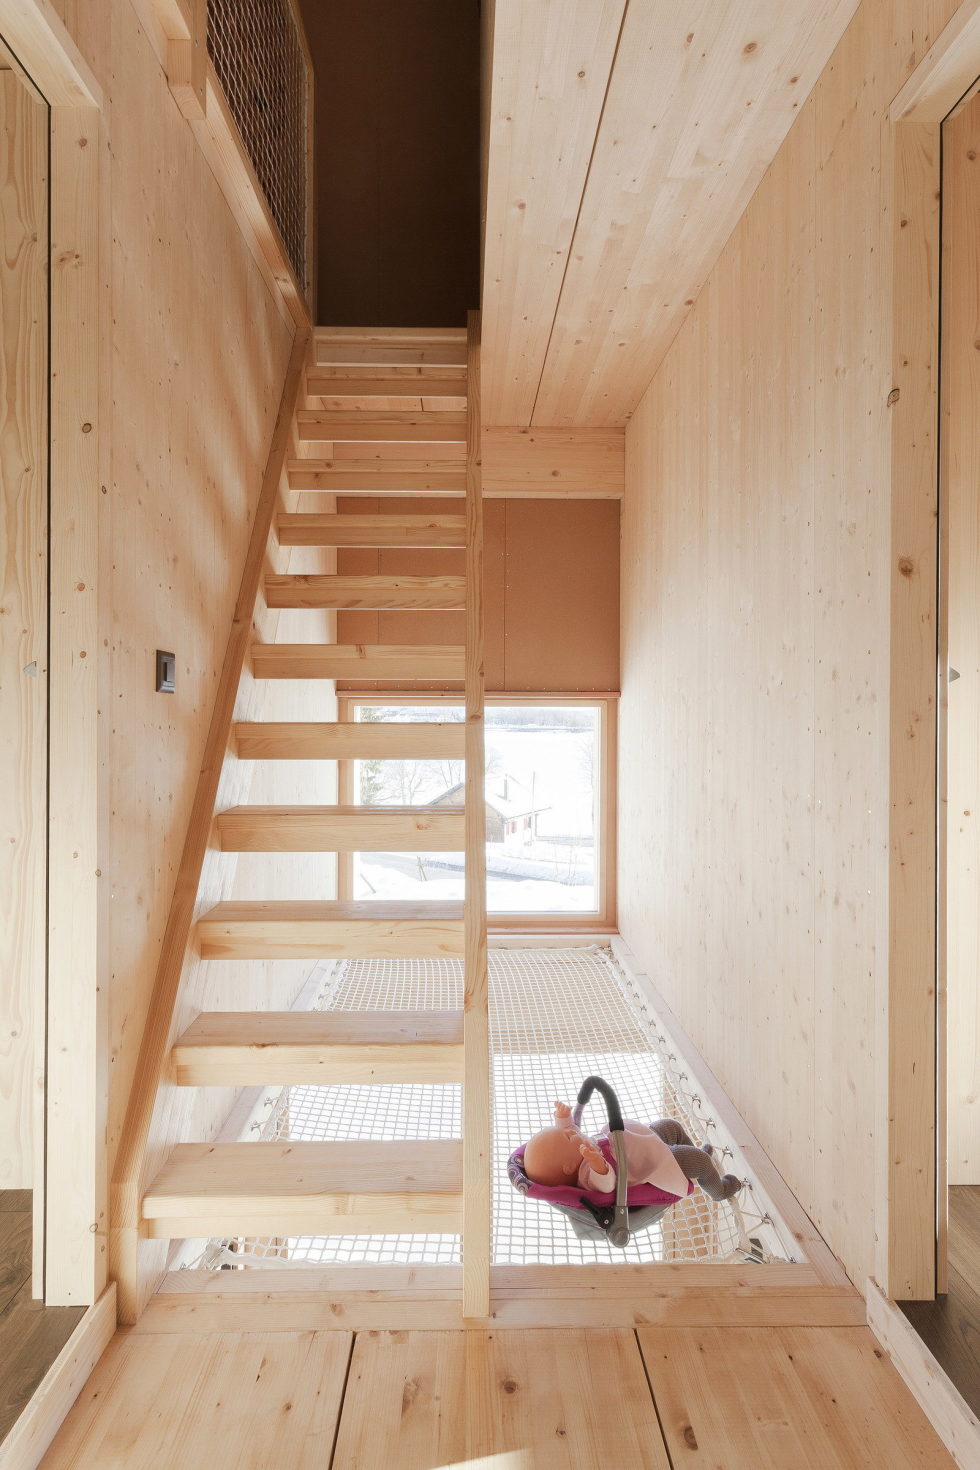 The House For A Family With Children at Switzerland Mountains From Kunik de Morsier architects 12